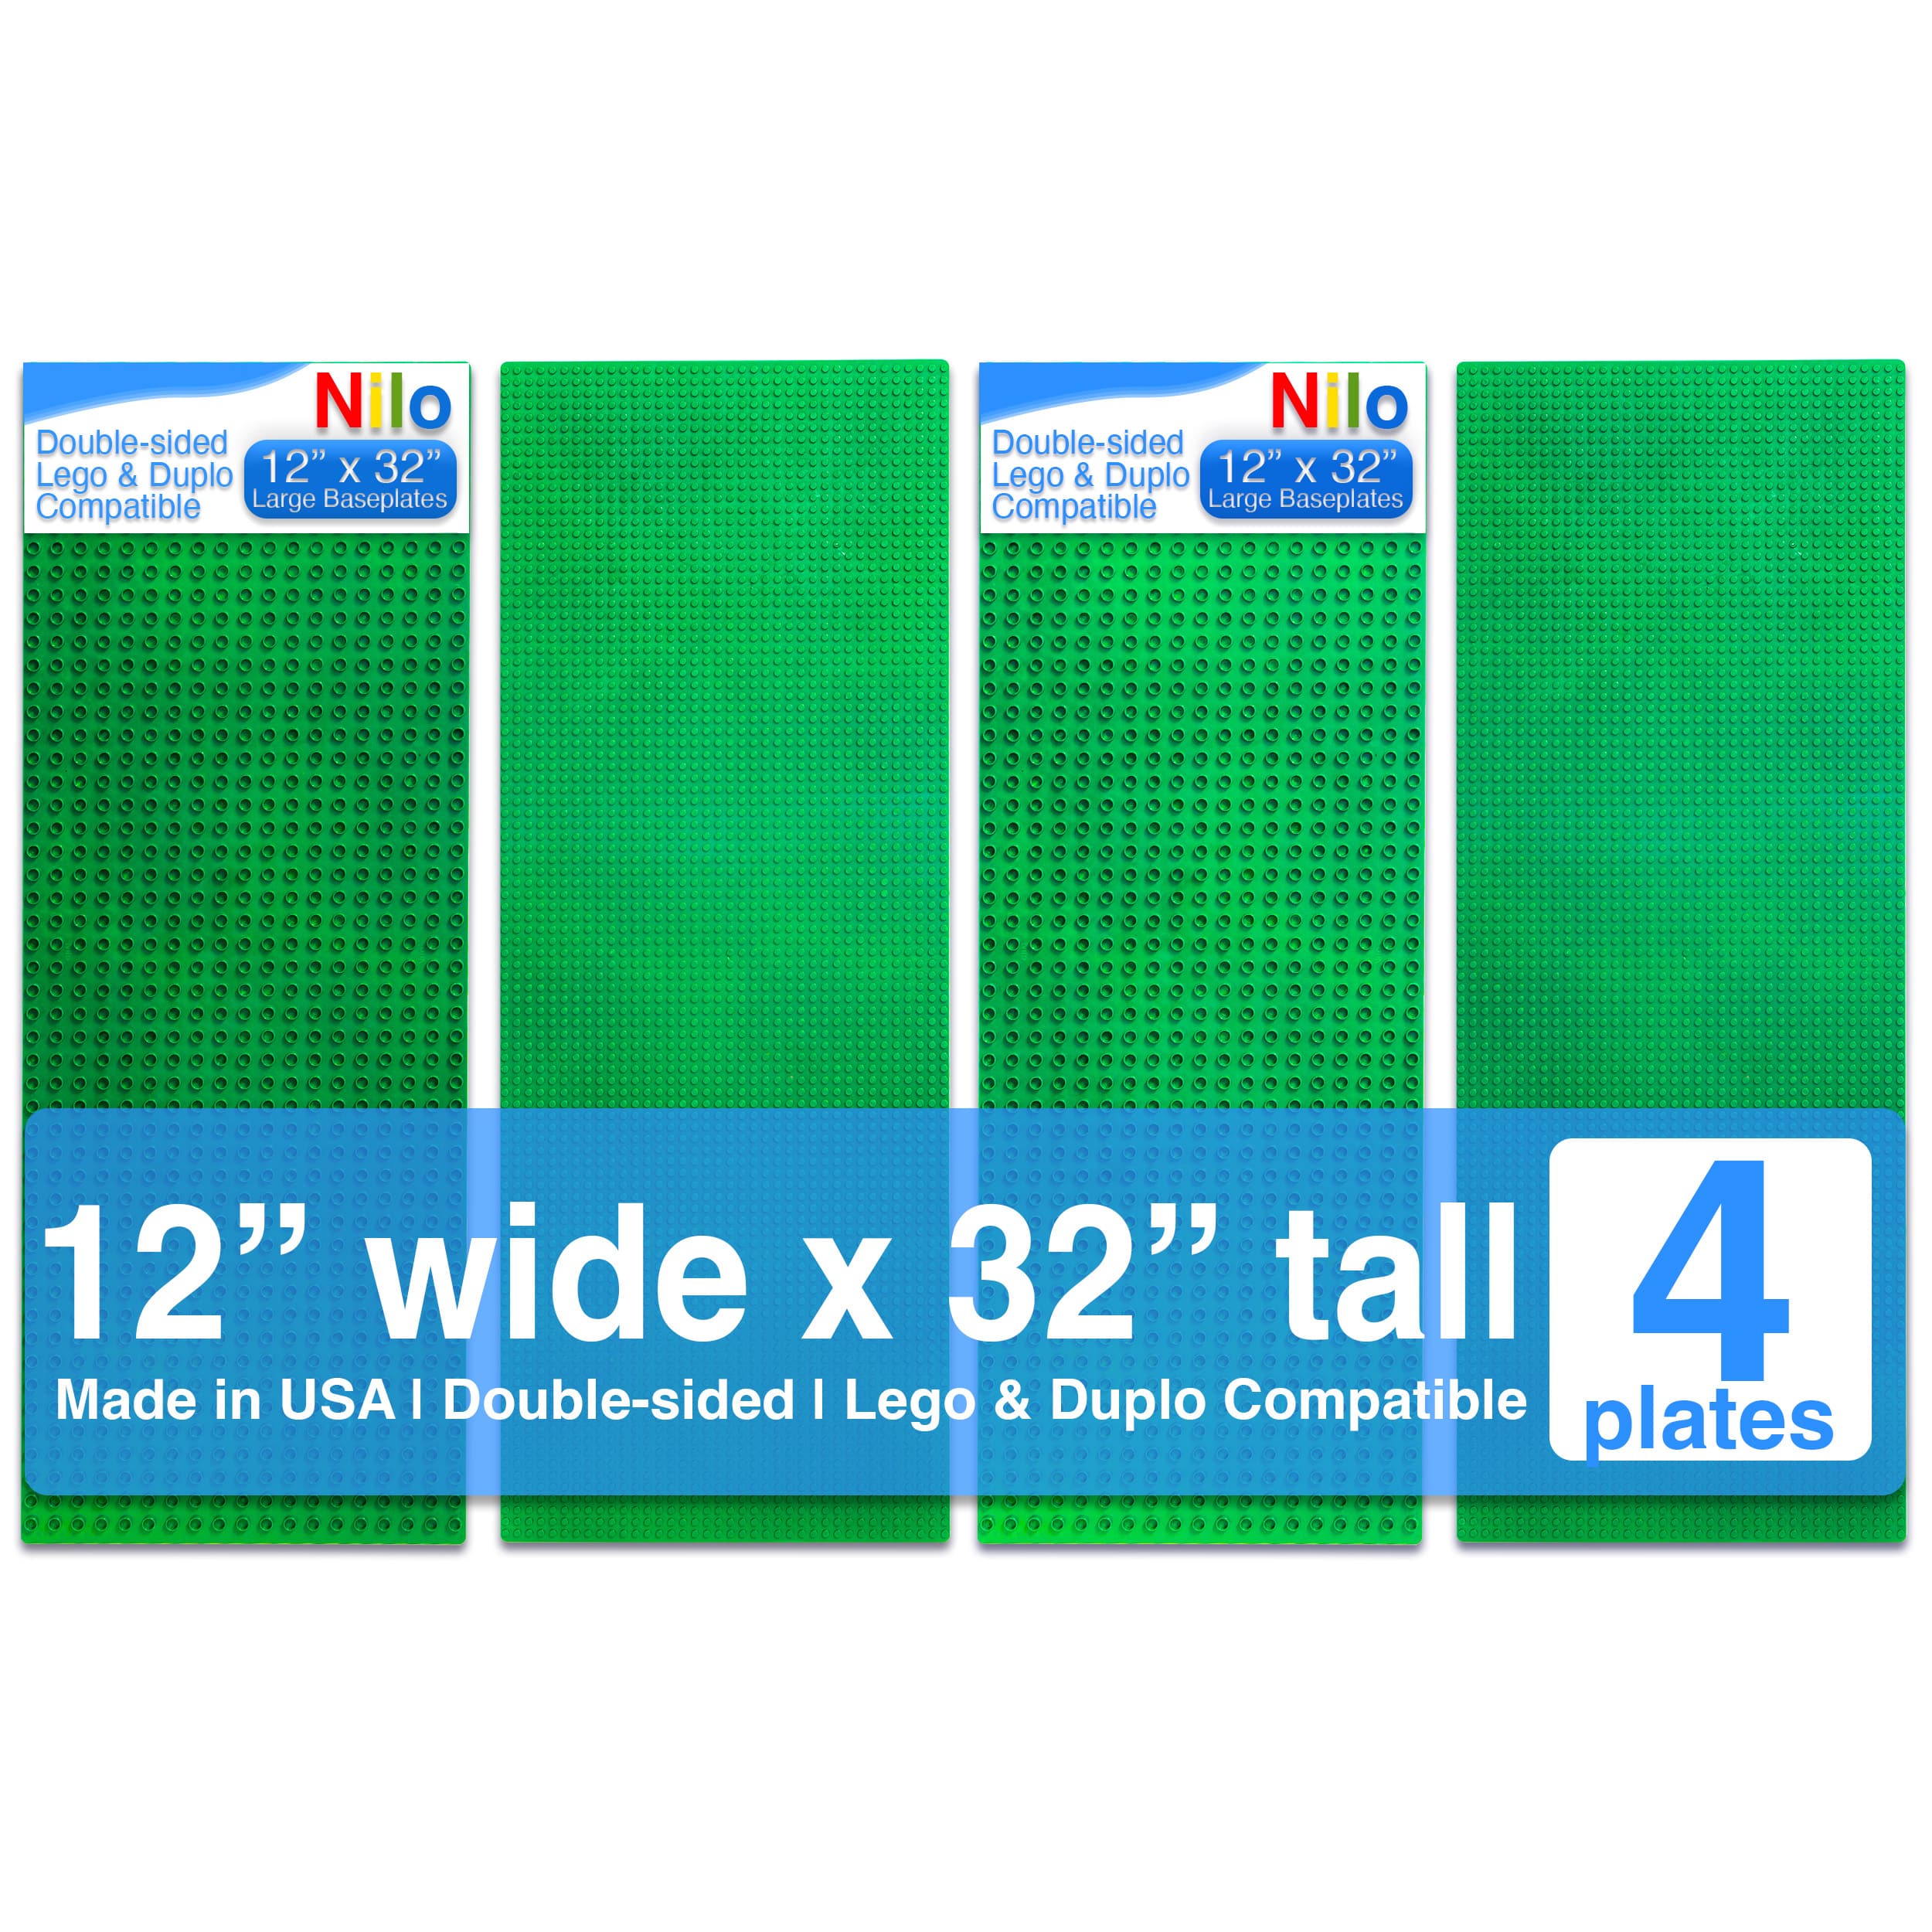 Green Base Plates by Nilo Compatible with Lego Bricks & Duplo Blocks